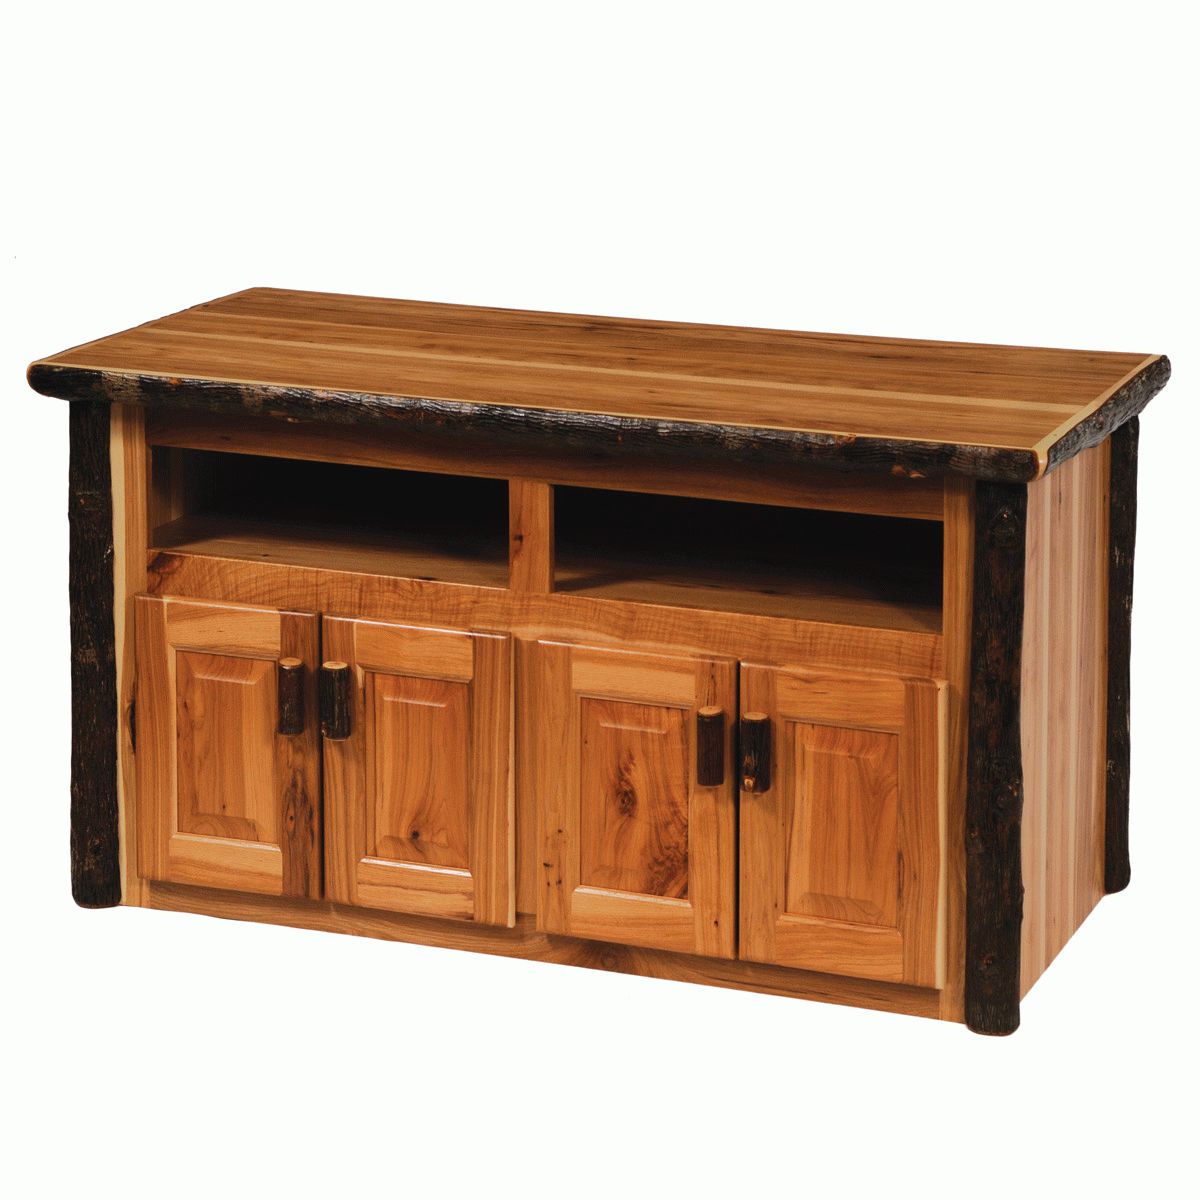 Rustic Tv Stands: Hickory Widescreen Tv Stand Intended For Anya Wide Tv Stands (View 14 of 20)